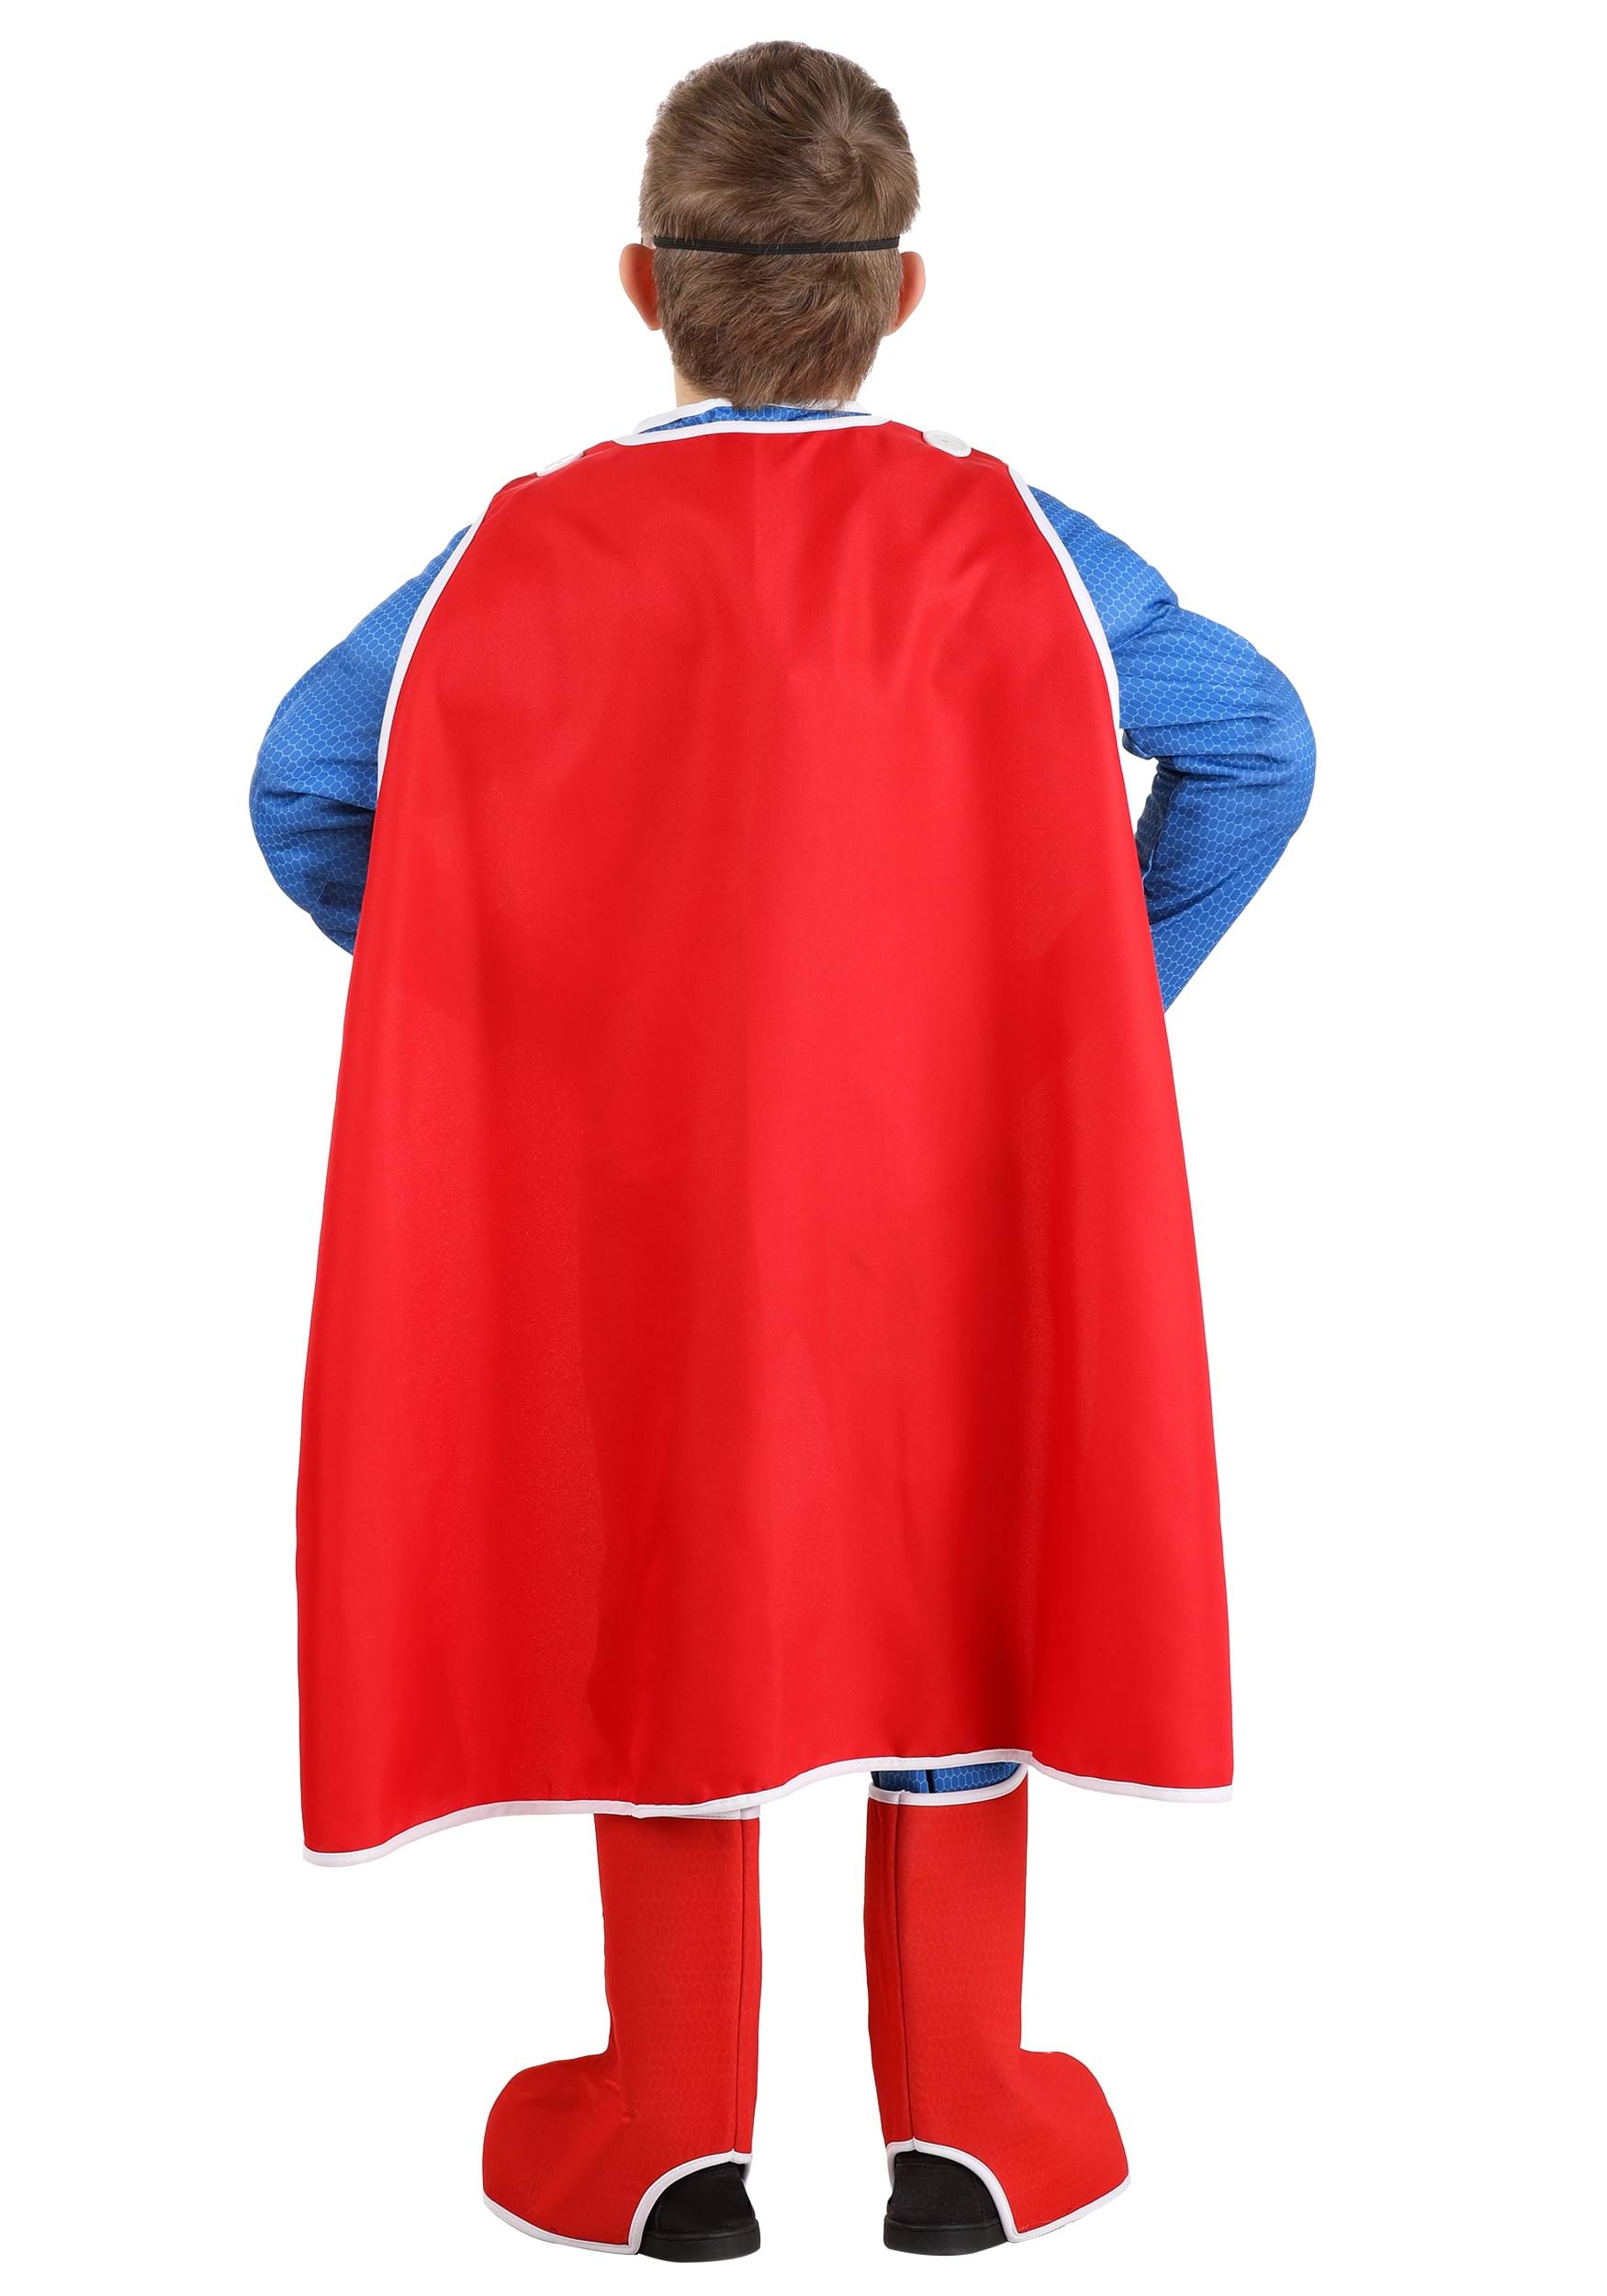 RED CHILDS FAKE MUSCLE CHEST PADDED SHIRT TOP KIDS FANCY DRESS SUPERHERO